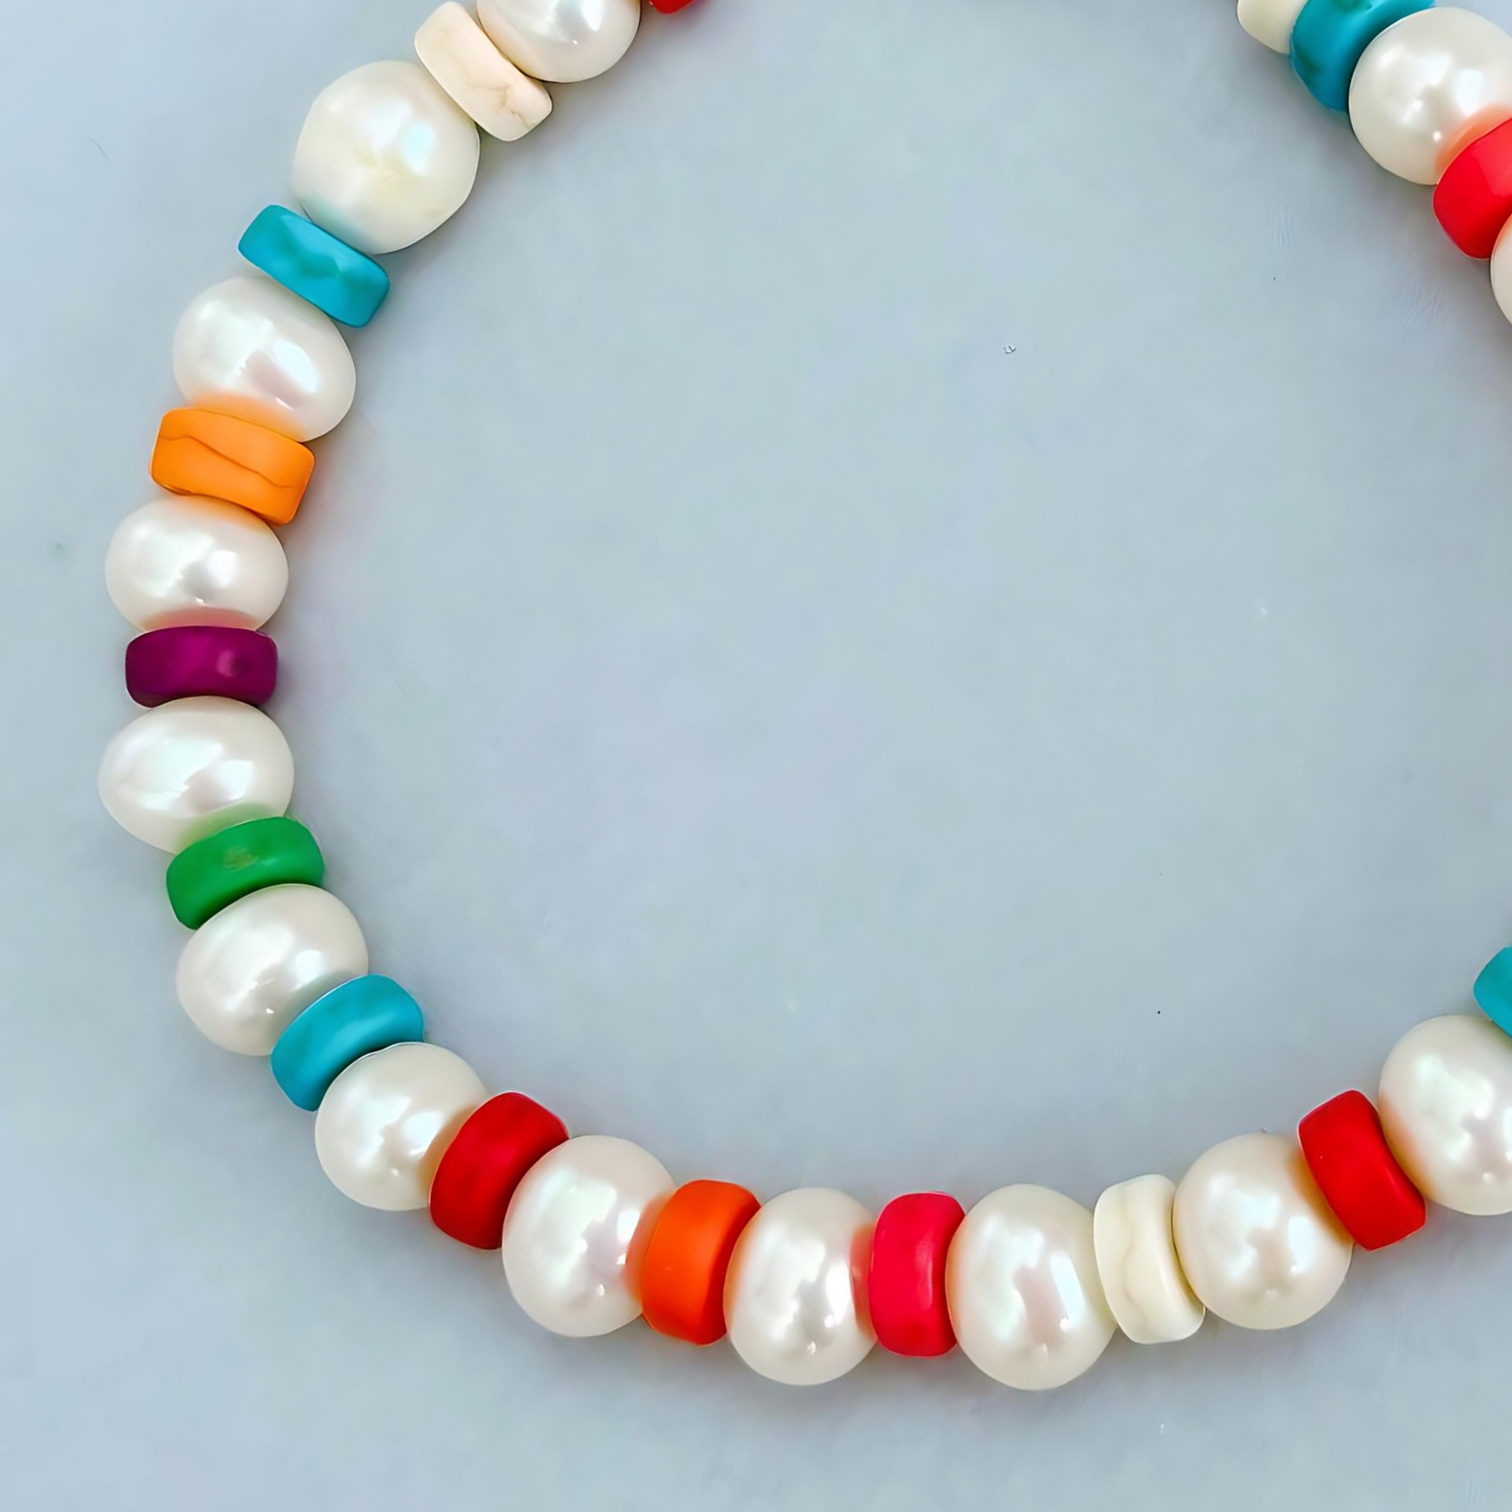 A grown-up version of the candy bracelets made with cultured white pearls and colourful howlite discs. The Le BijouBijou Candy Bracelet. Close-up